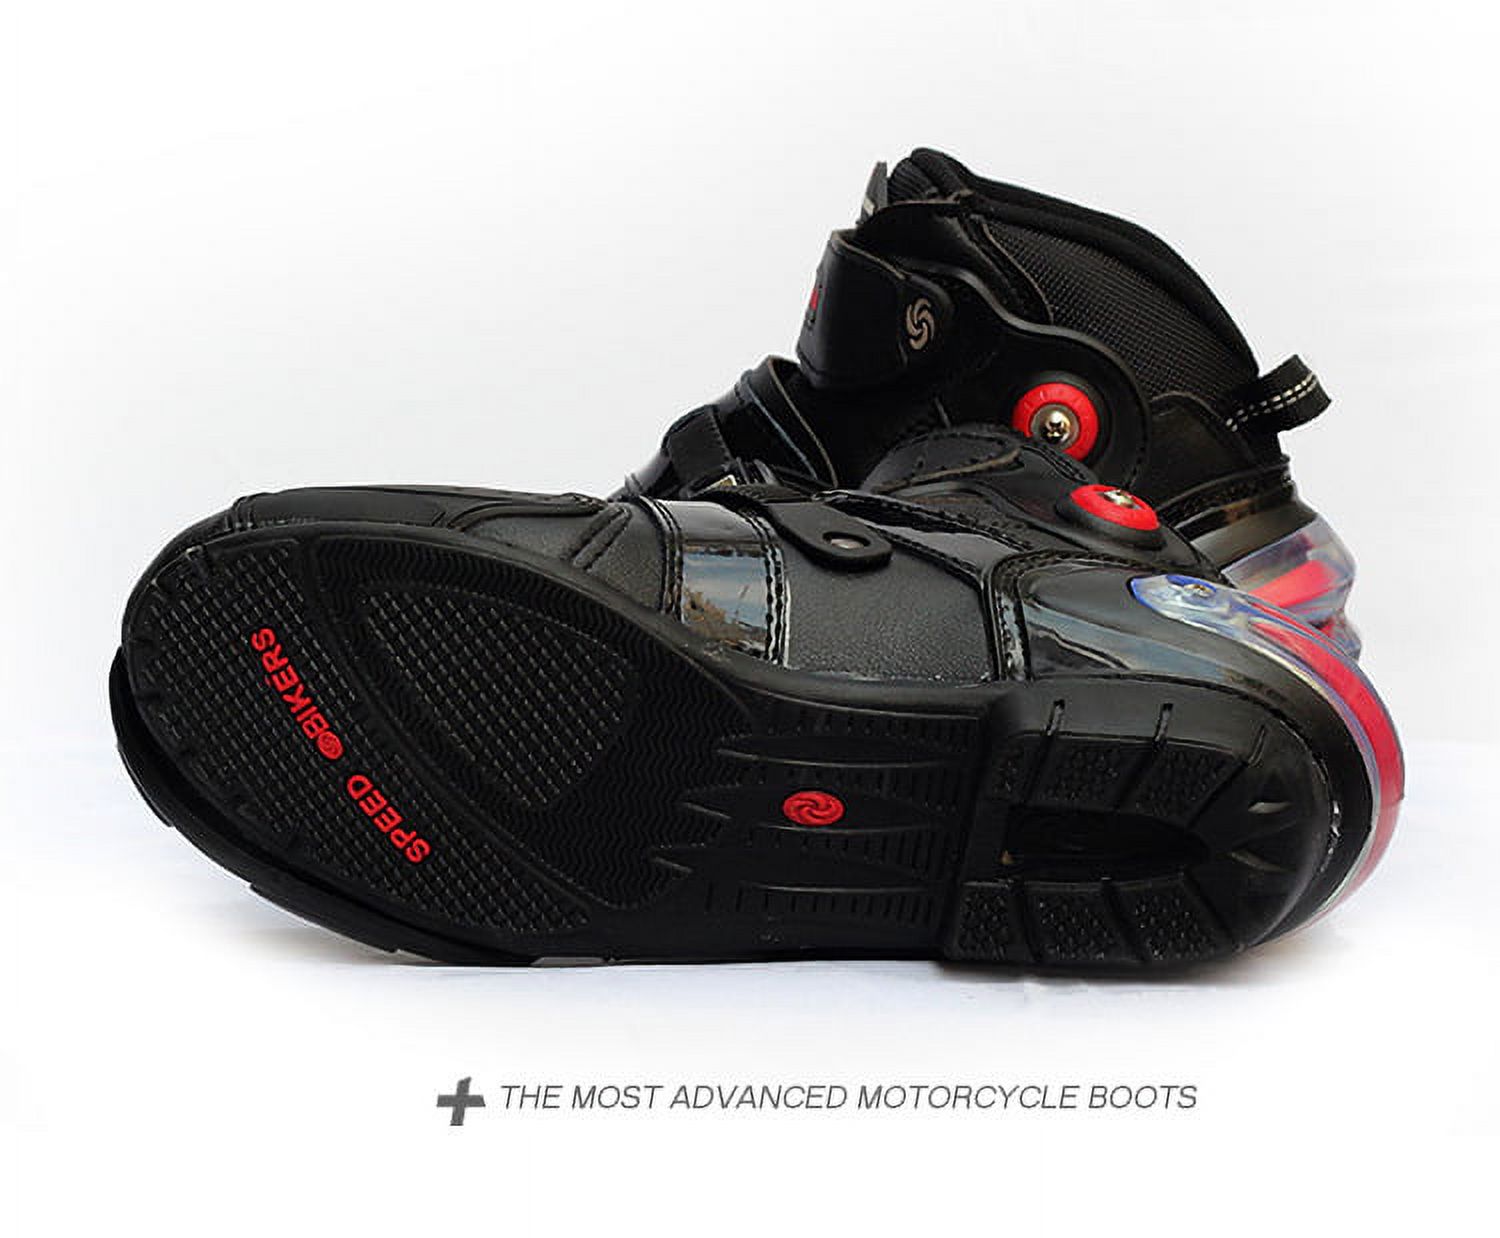 Men Soft Motorcycle Boots Biker Waterproof Speed Motocross Boots Non-slip Motorcycle Shoes Color:black Shoe US Size:9.5 - image 2 of 8